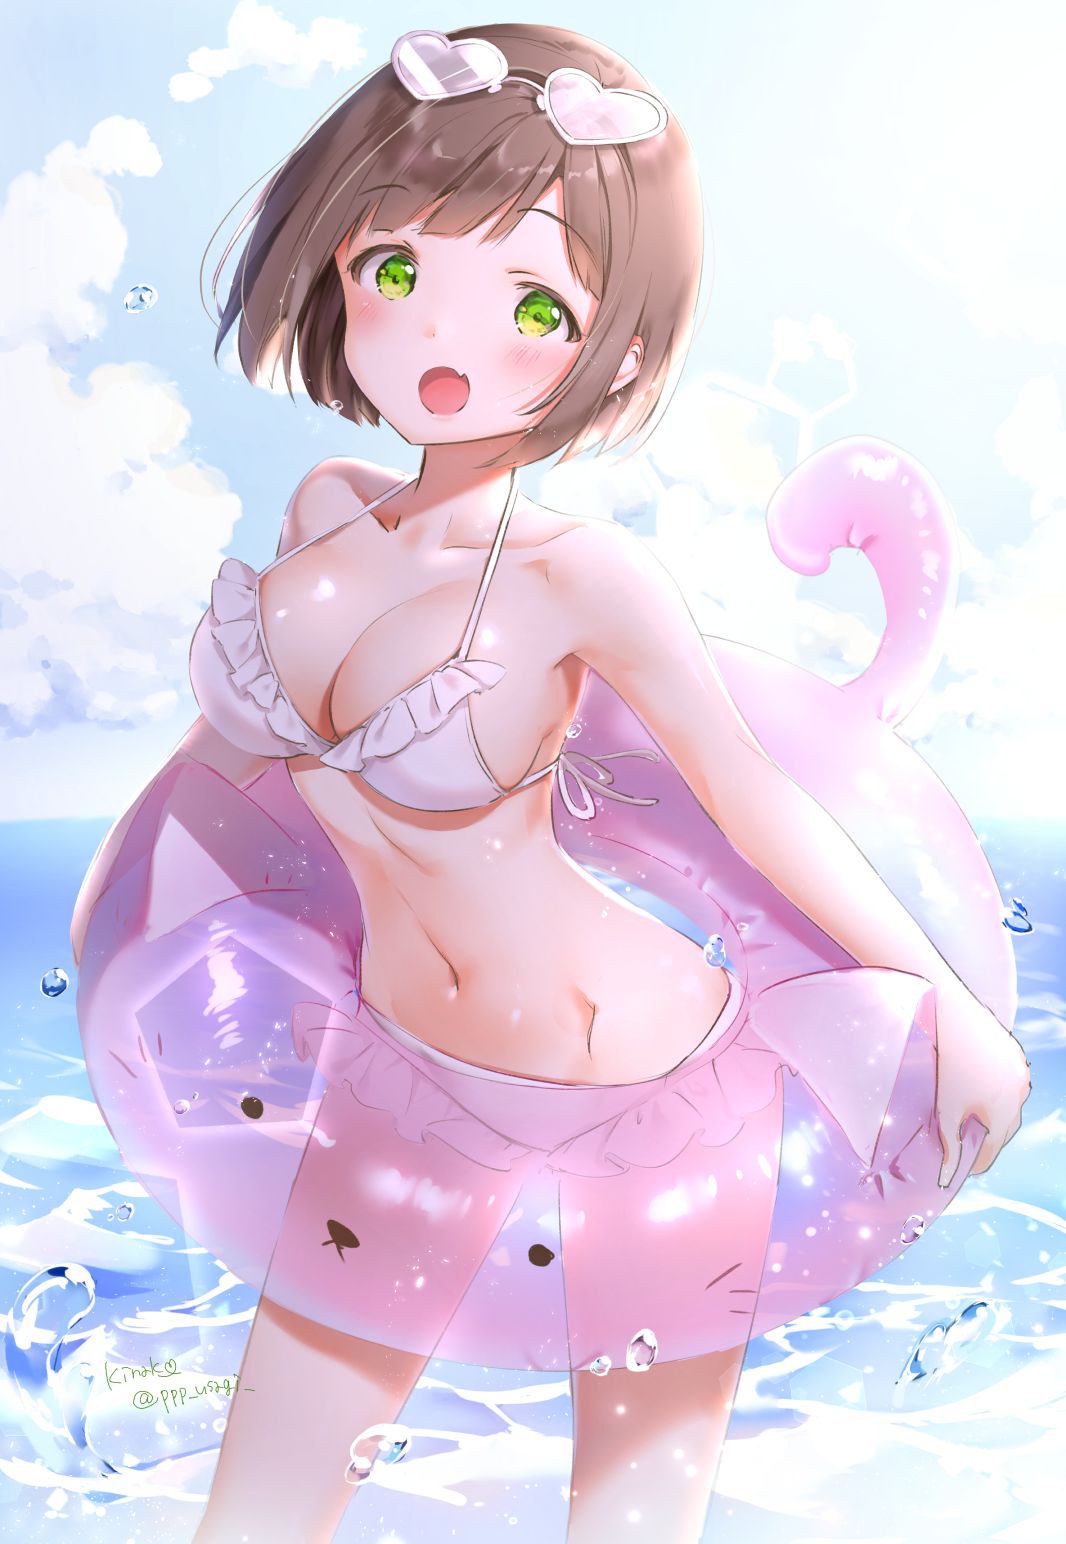 [Secondary] Moe images of swimsuit girls bathing in the sea and swimming pool 1